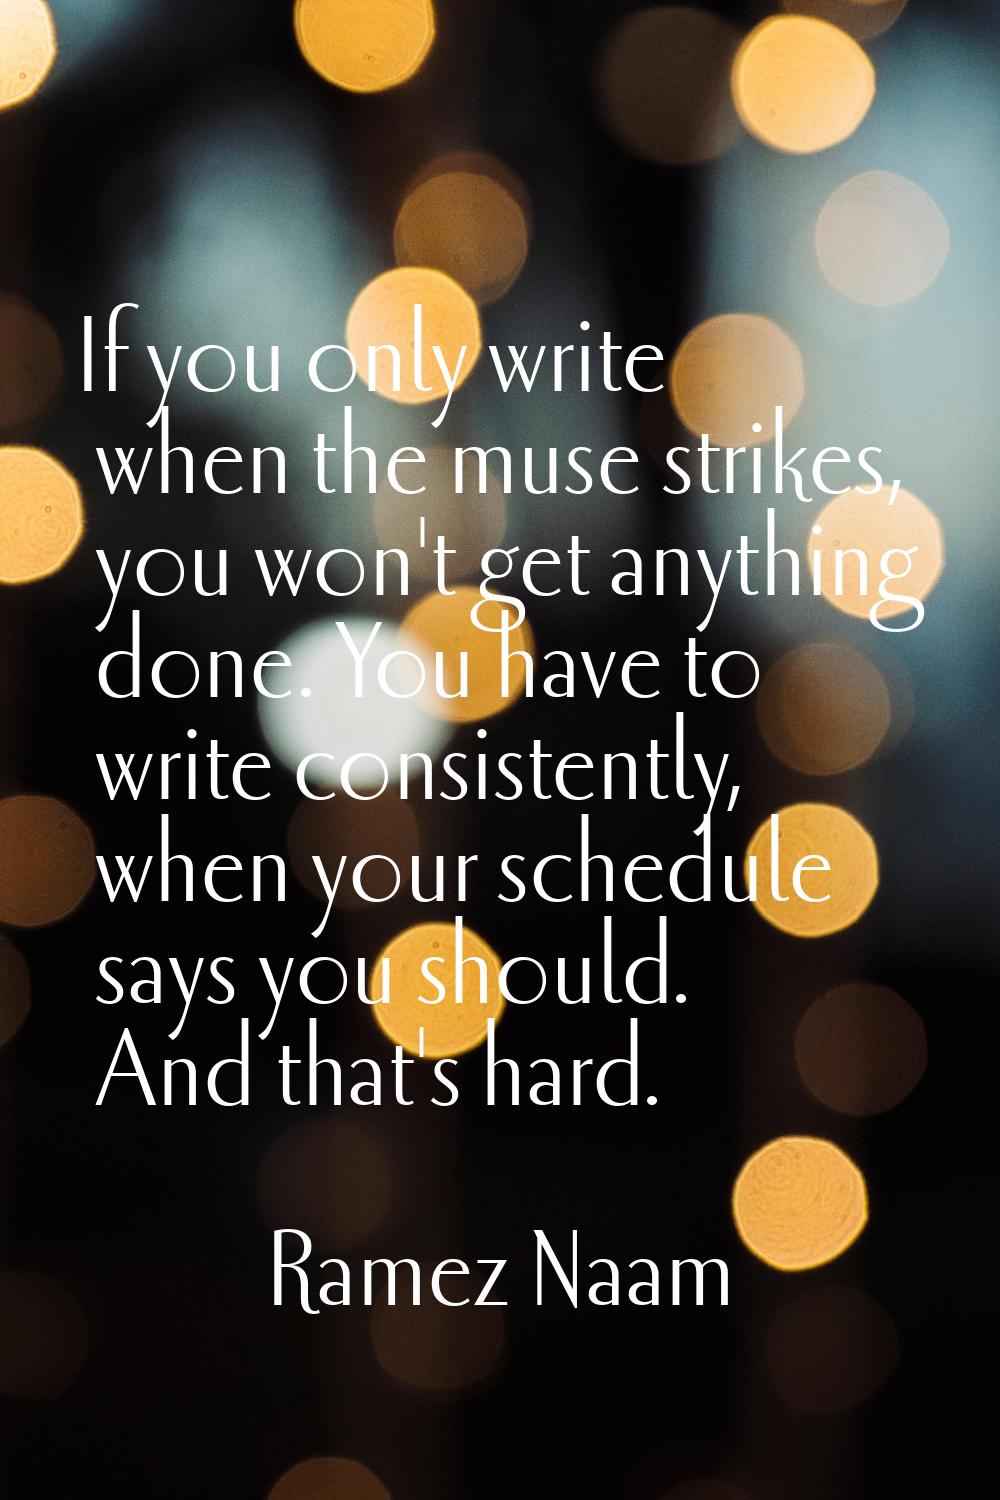 If you only write when the muse strikes, you won't get anything done. You have to write consistentl